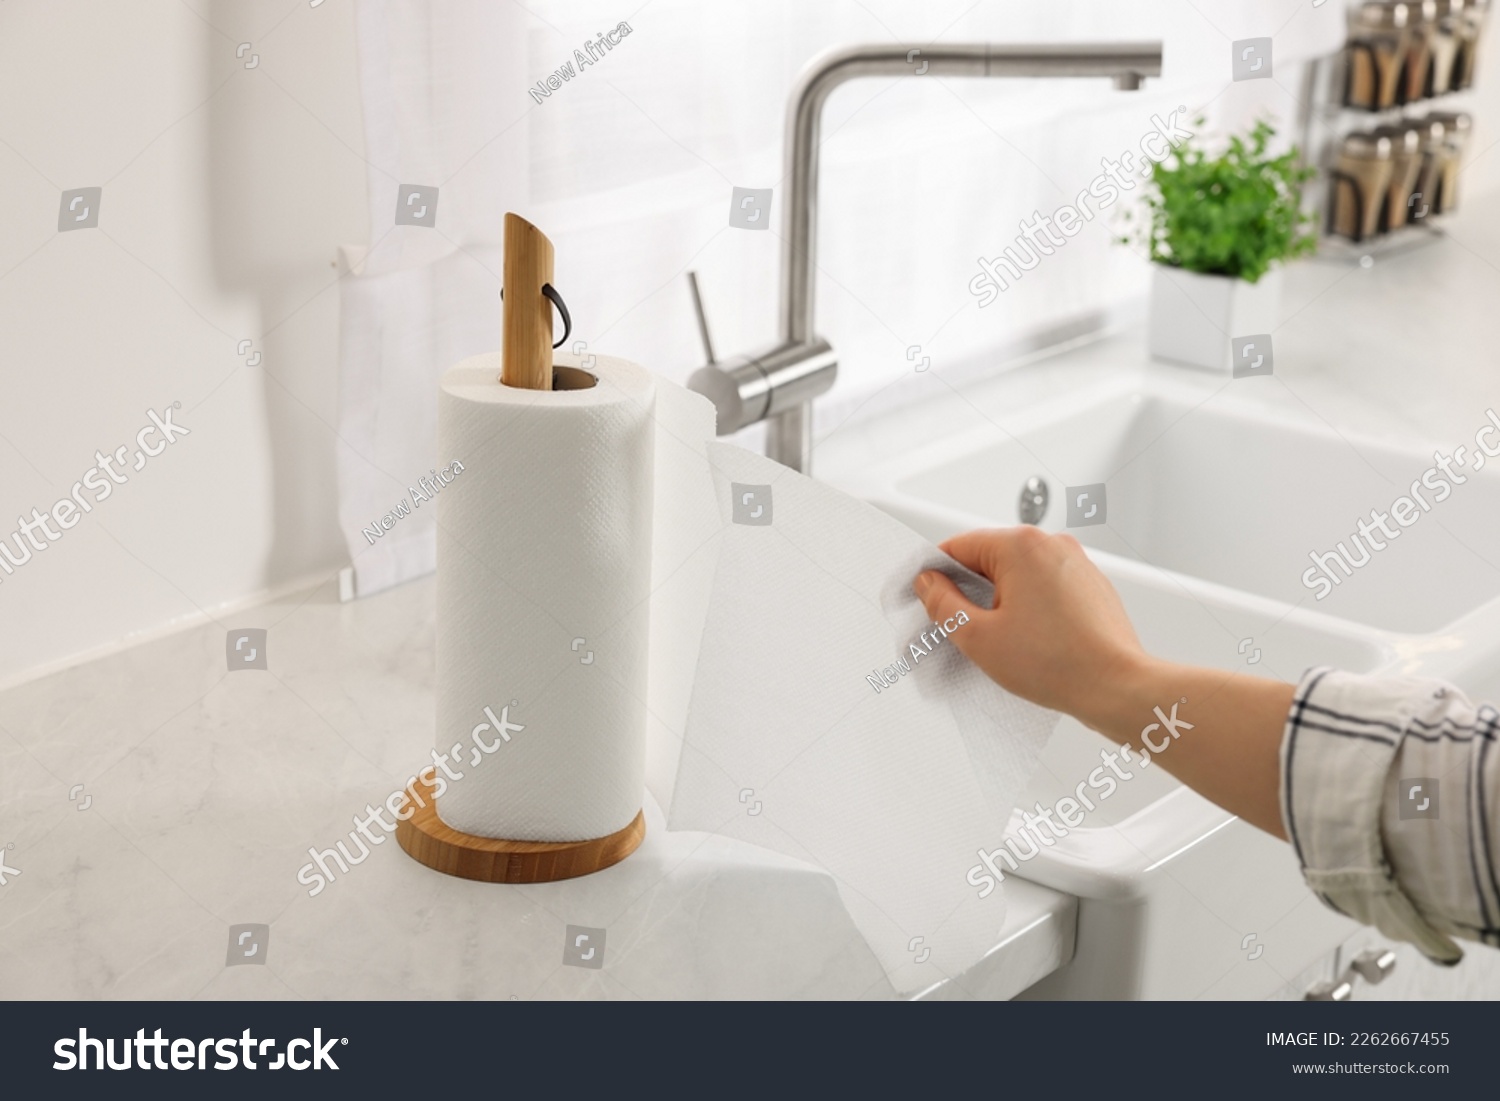 Woman using paper towels in kitchen, closeup #2262667455